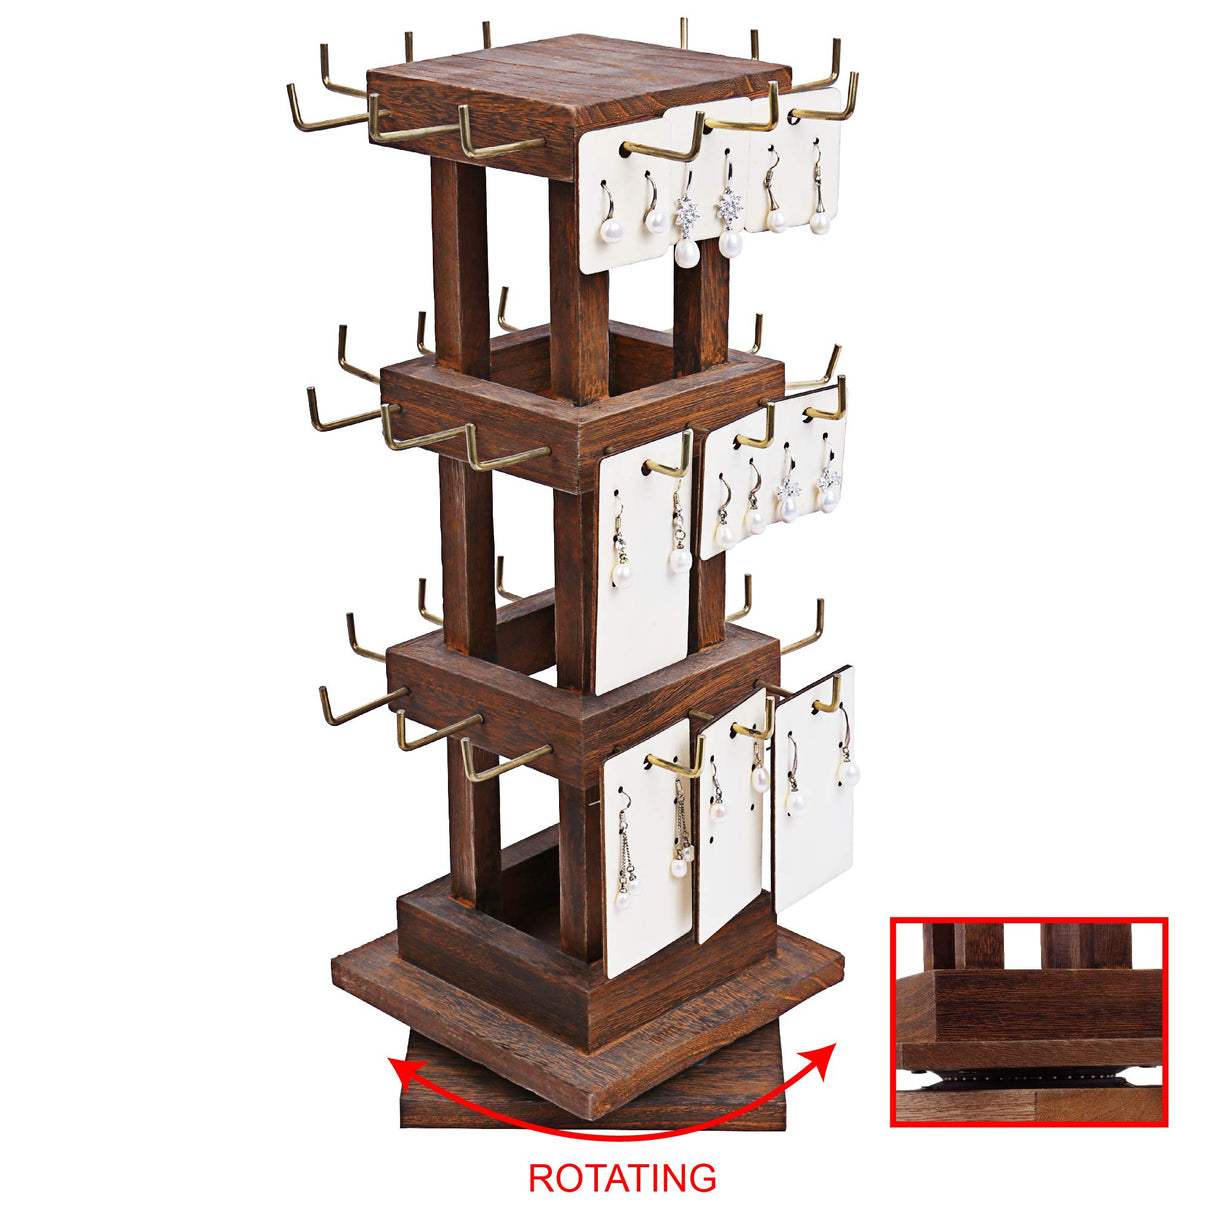 Ikee Design Natural Wood Rotating 36 Hooks Jewelry Tower, Spinning Earring Card Storage Display Holder Stand for Store, Showcase, Tradeshow and Home, Brown color